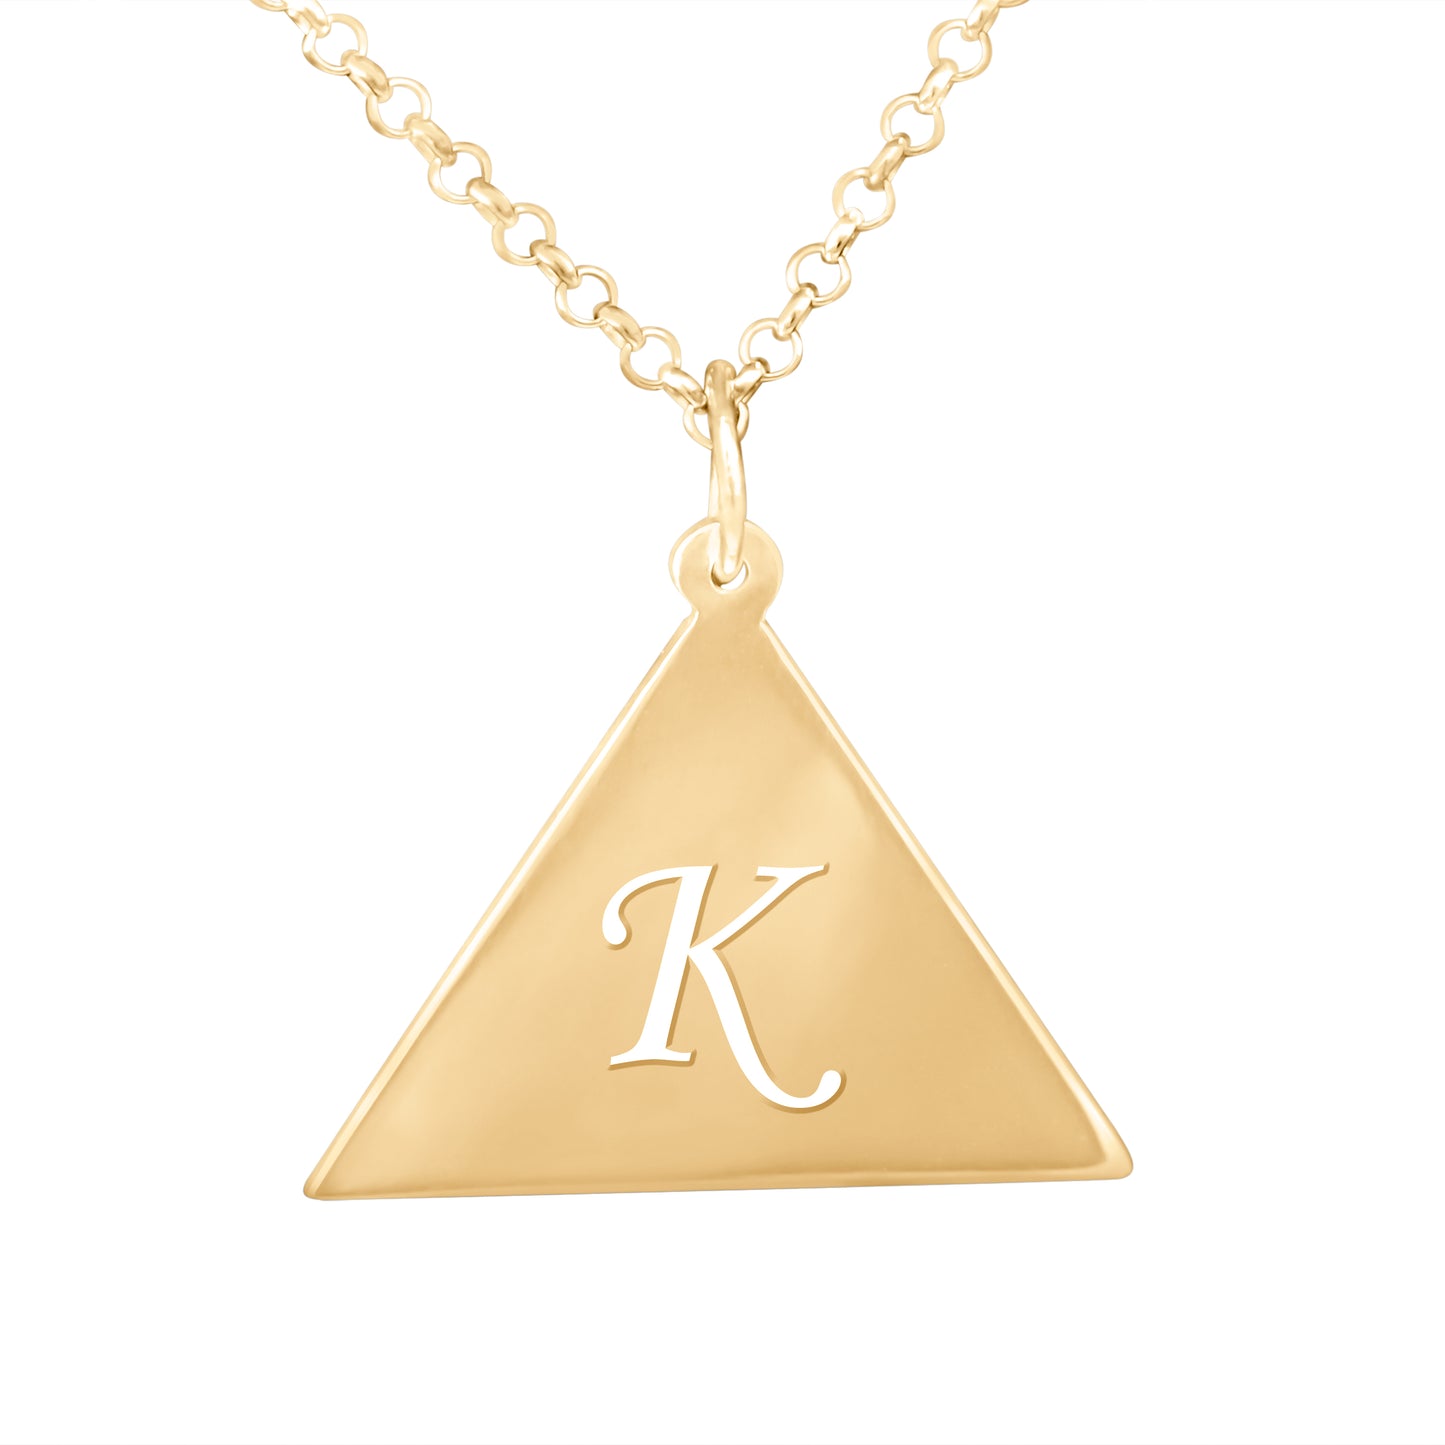 Triangle Shaped Cut Out Initial